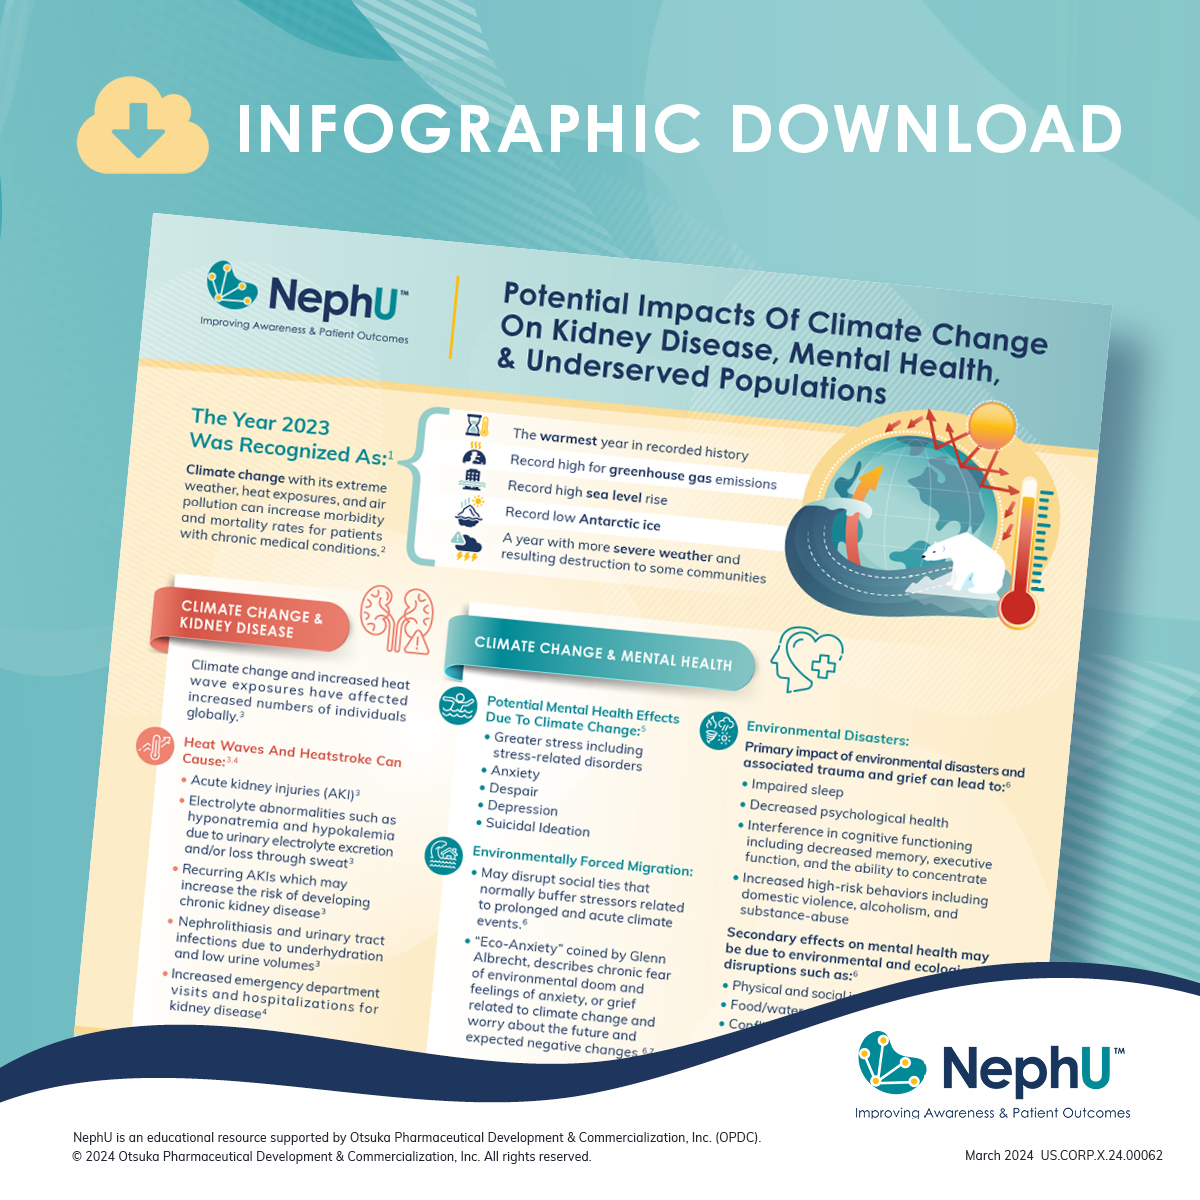 In the infographic, 'Potential Impacts of Climate Change On Kidney Disease, Mental Health & Underserved Populations,' readers can discover more about climate change's effect on kidney and mental health. go.nephu.org/MCQJ #ClimateChange #MentalHealth #KidneyHealth #NephU